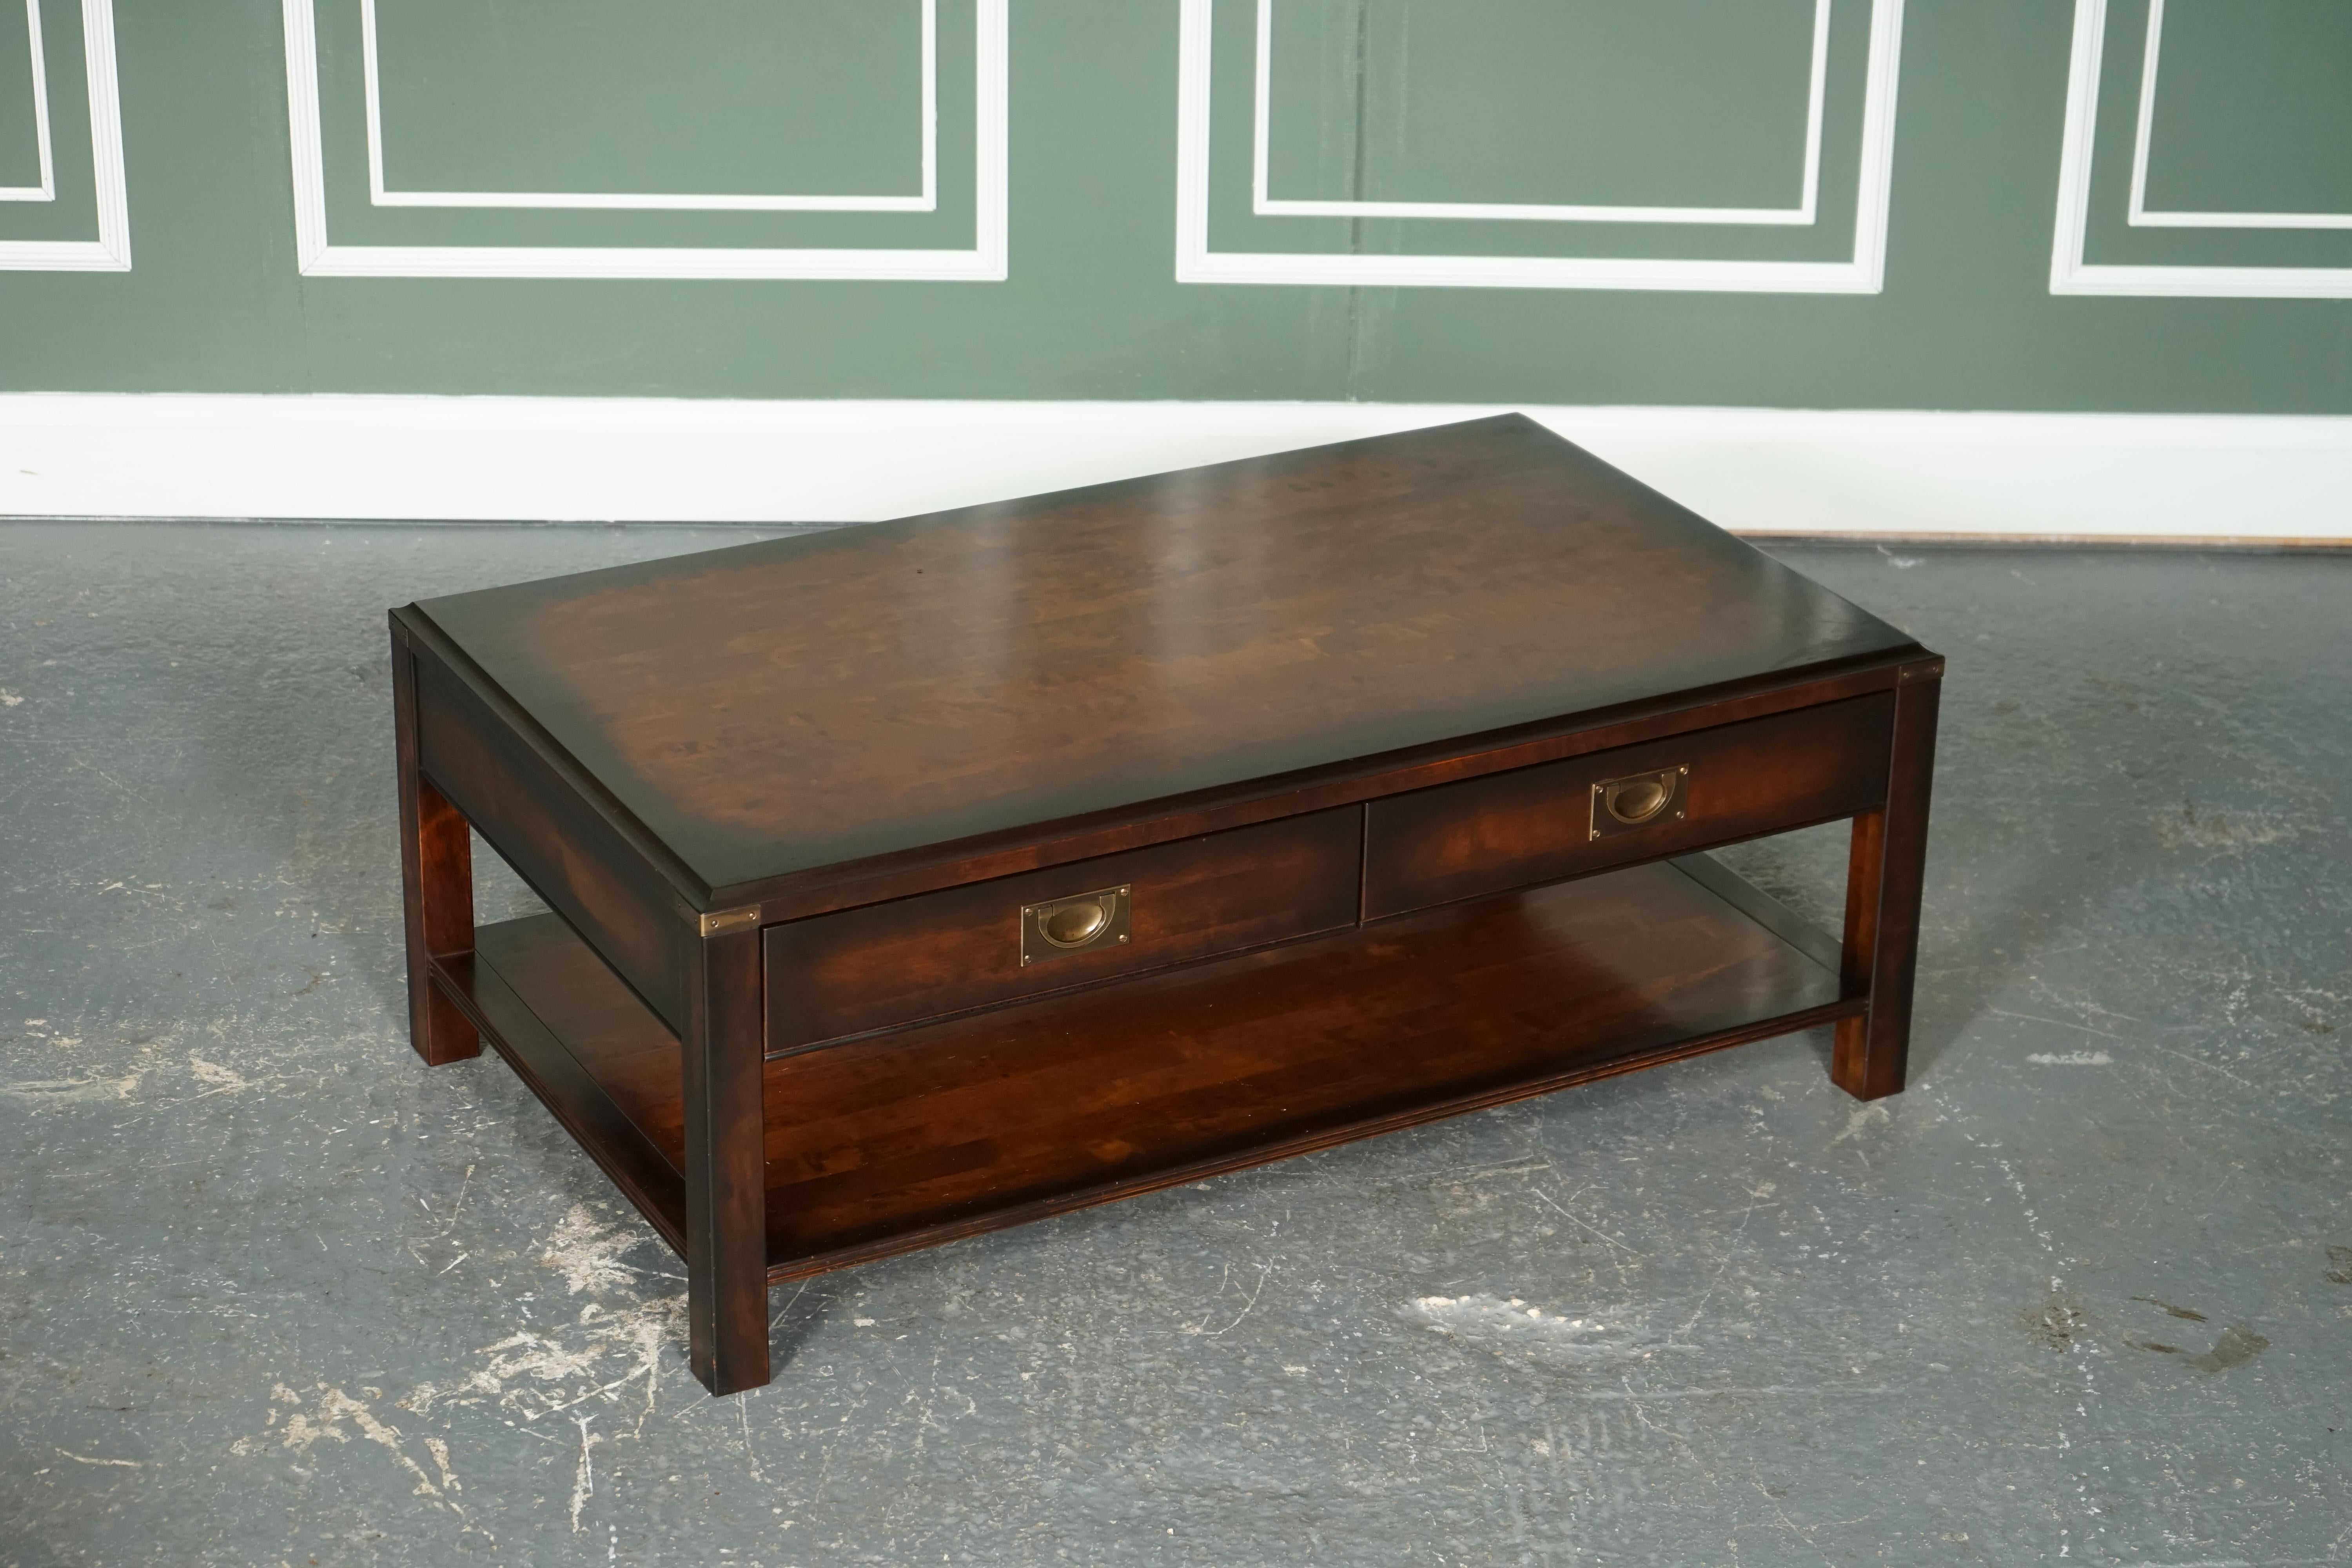 We are so excited to present to you this stunning vintage military campaign mahogany & brass coffee table.

The table has been retailed by John Lewis, you can see the plaque in one of the drawers.
Very good-looking piece with 2 drawers which work